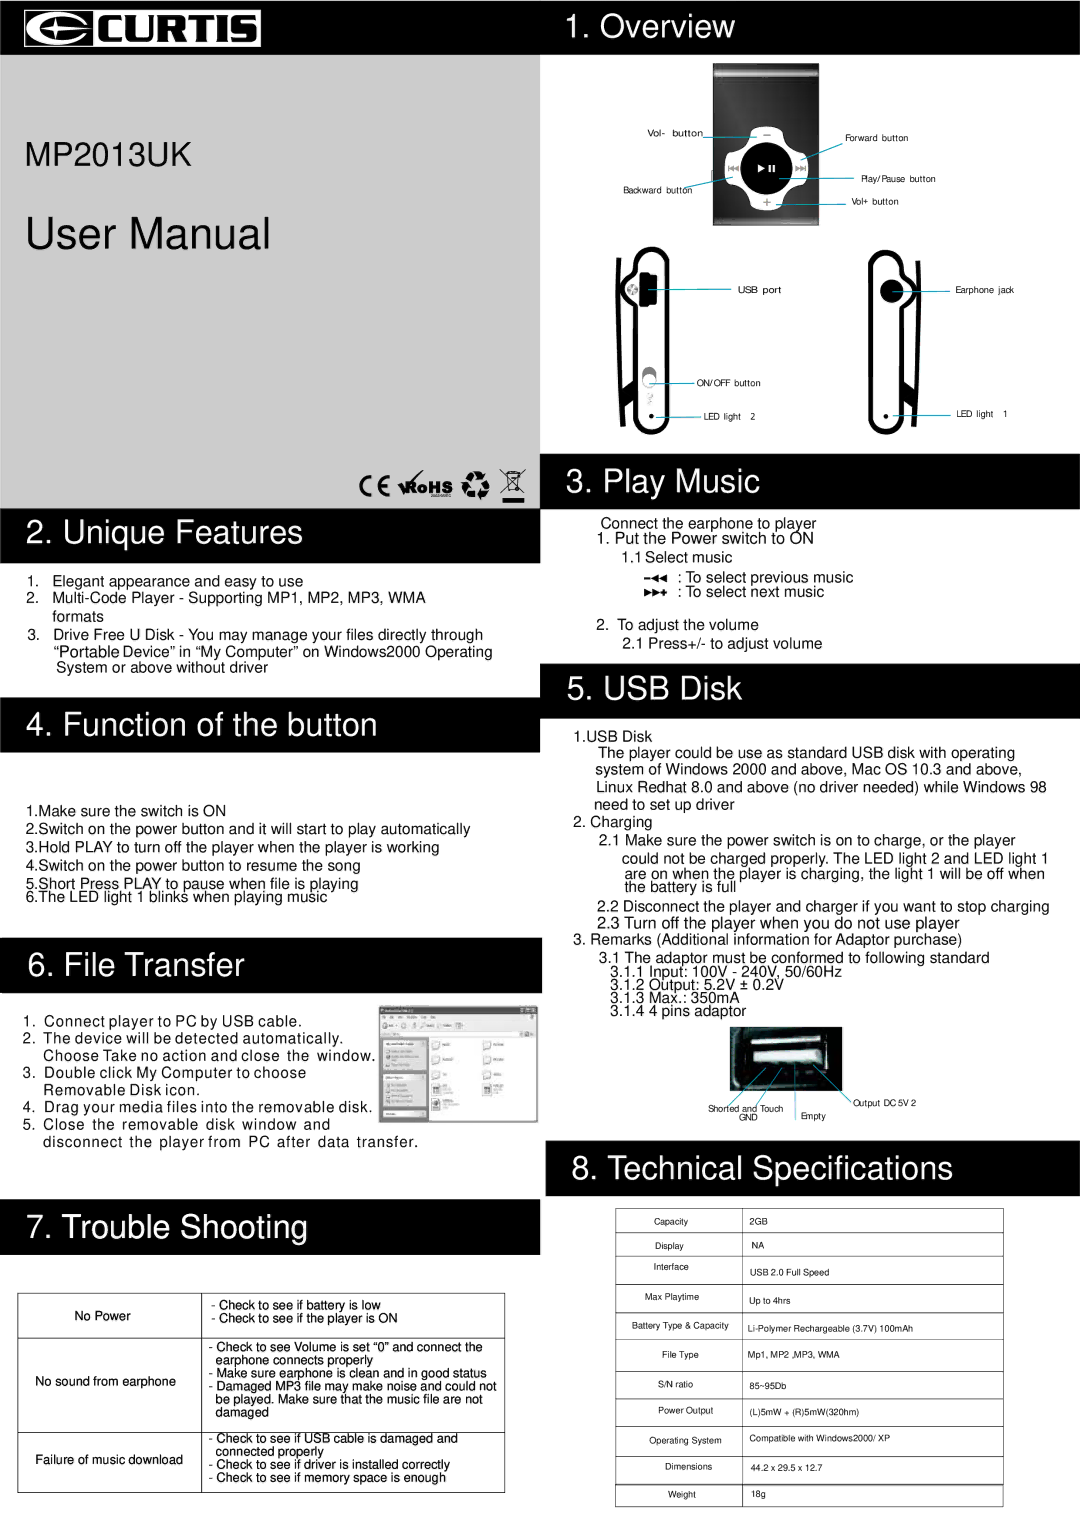 Curtis MP2013UK user manual Overview, Unique Features, Function of the button, File Transfer, Play Music, USB Disk 